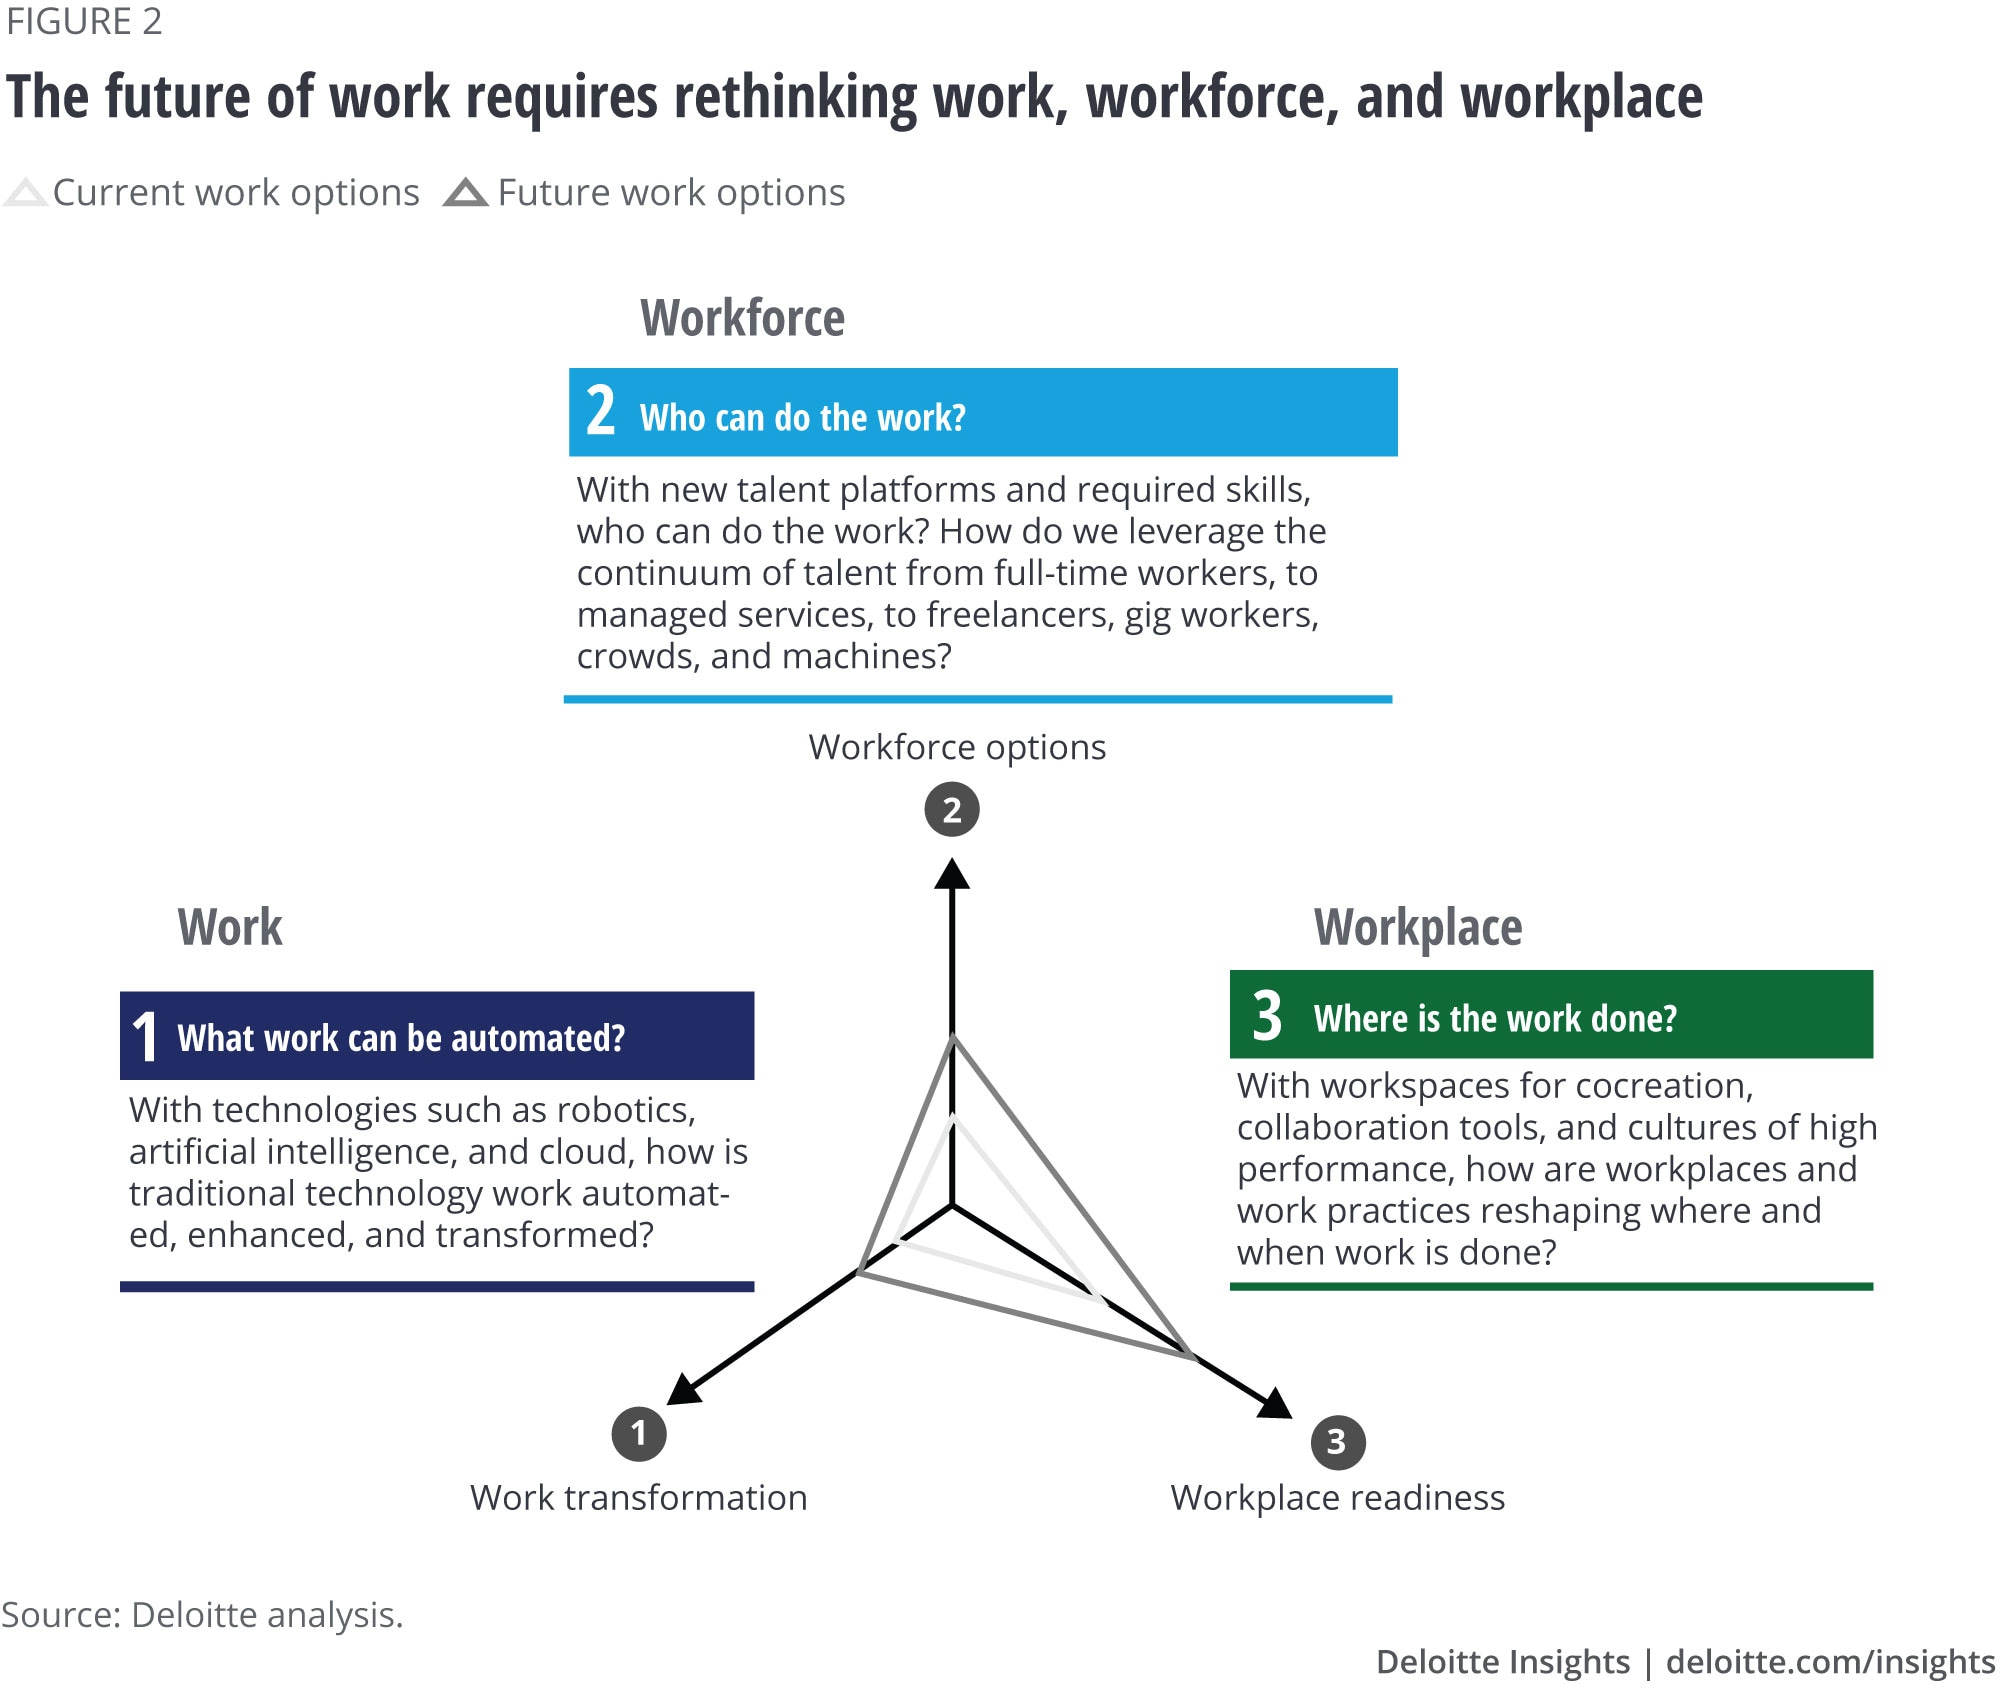 The future of work requires rethinking work, workforce, and workplace